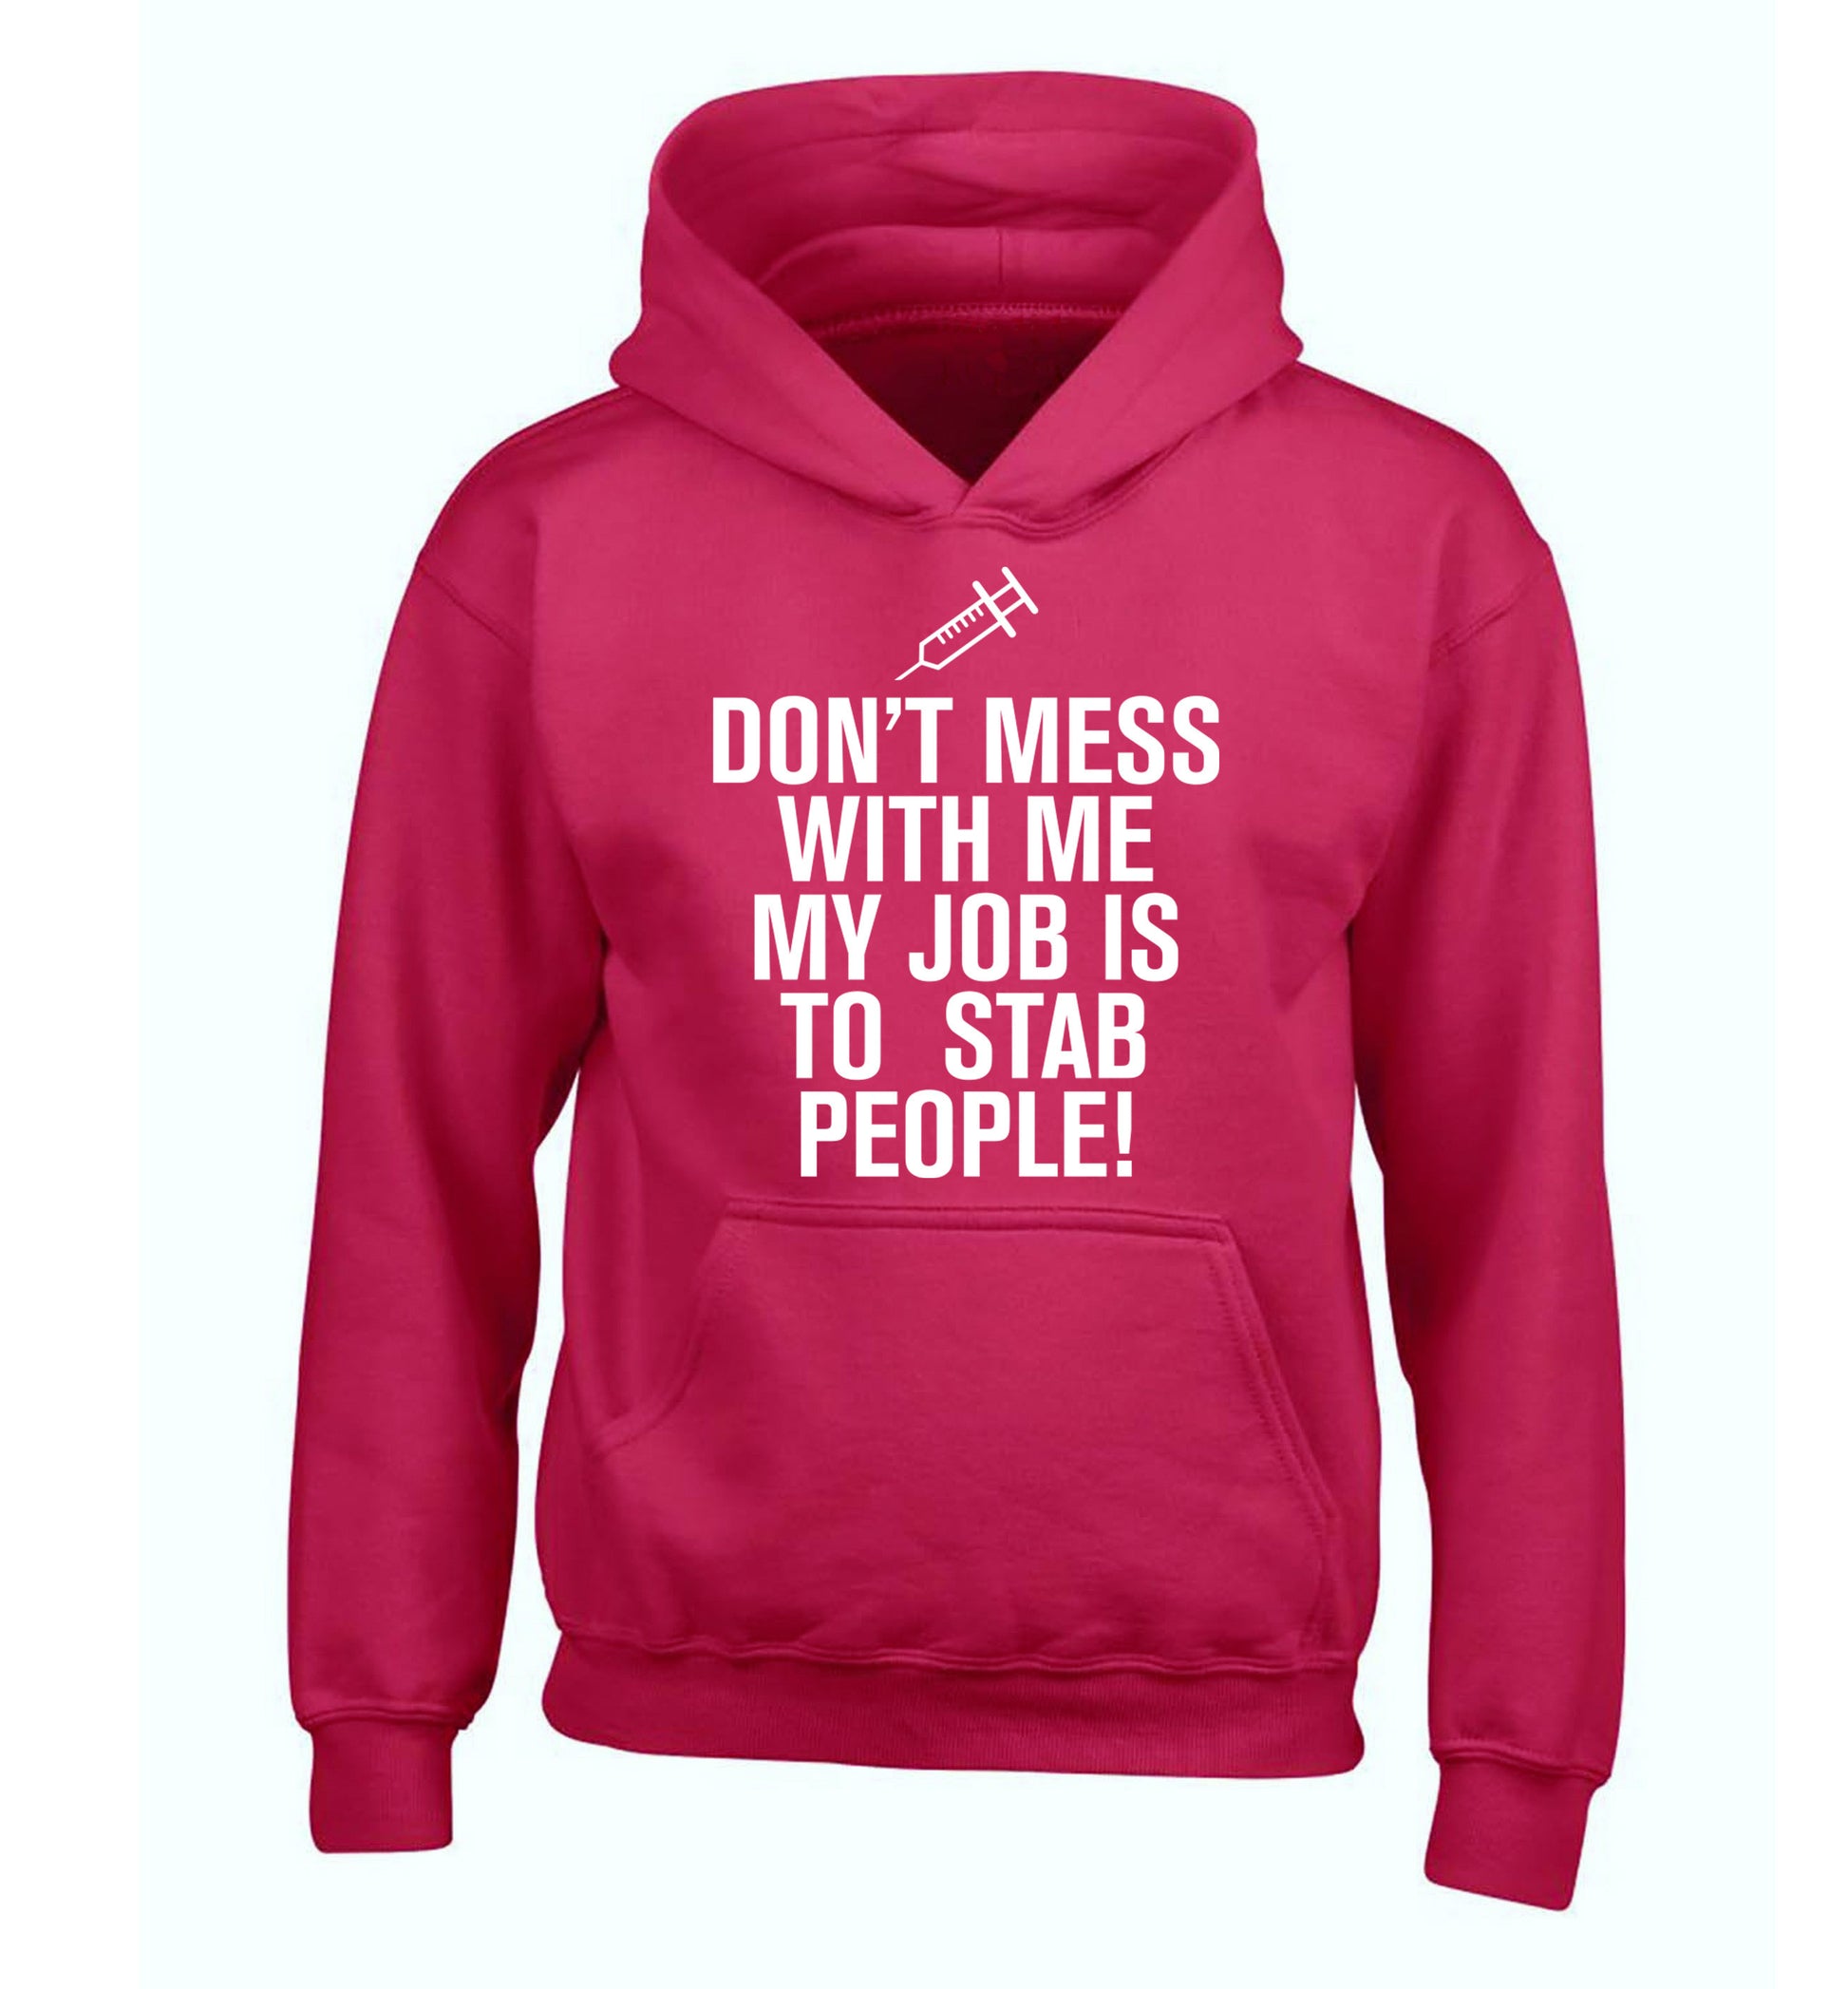 Don't mess with me my job is to stab people! children's pink hoodie 12-14 Years